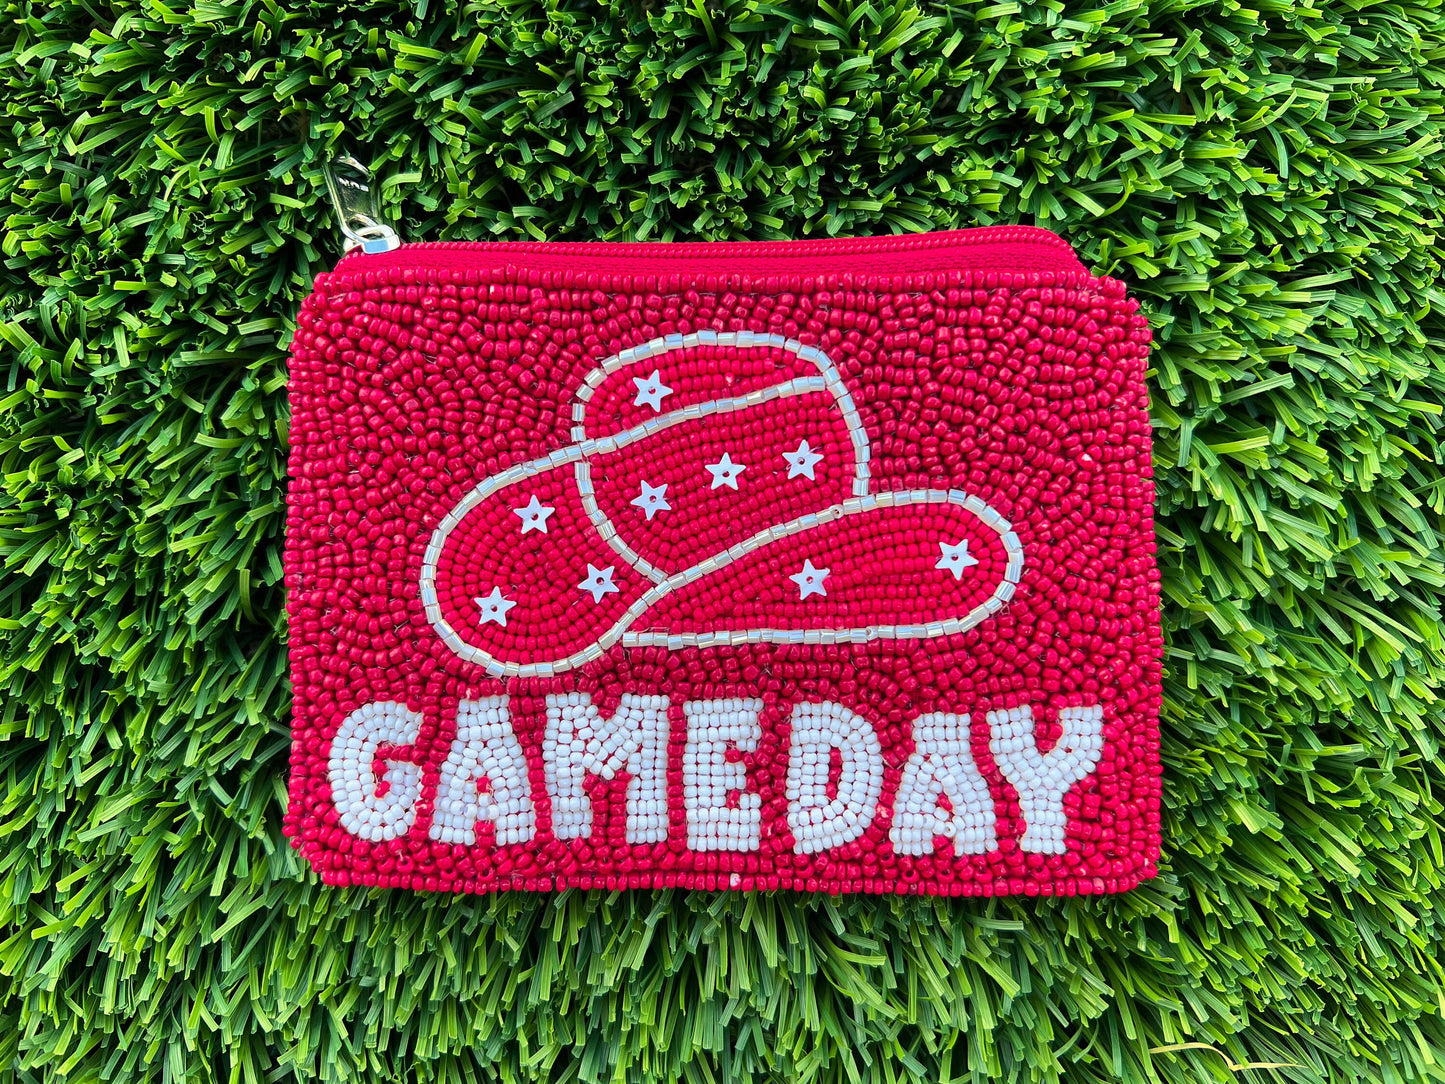 Cowboy Hat Beaded Game Day Coin Purse / Seed Bead